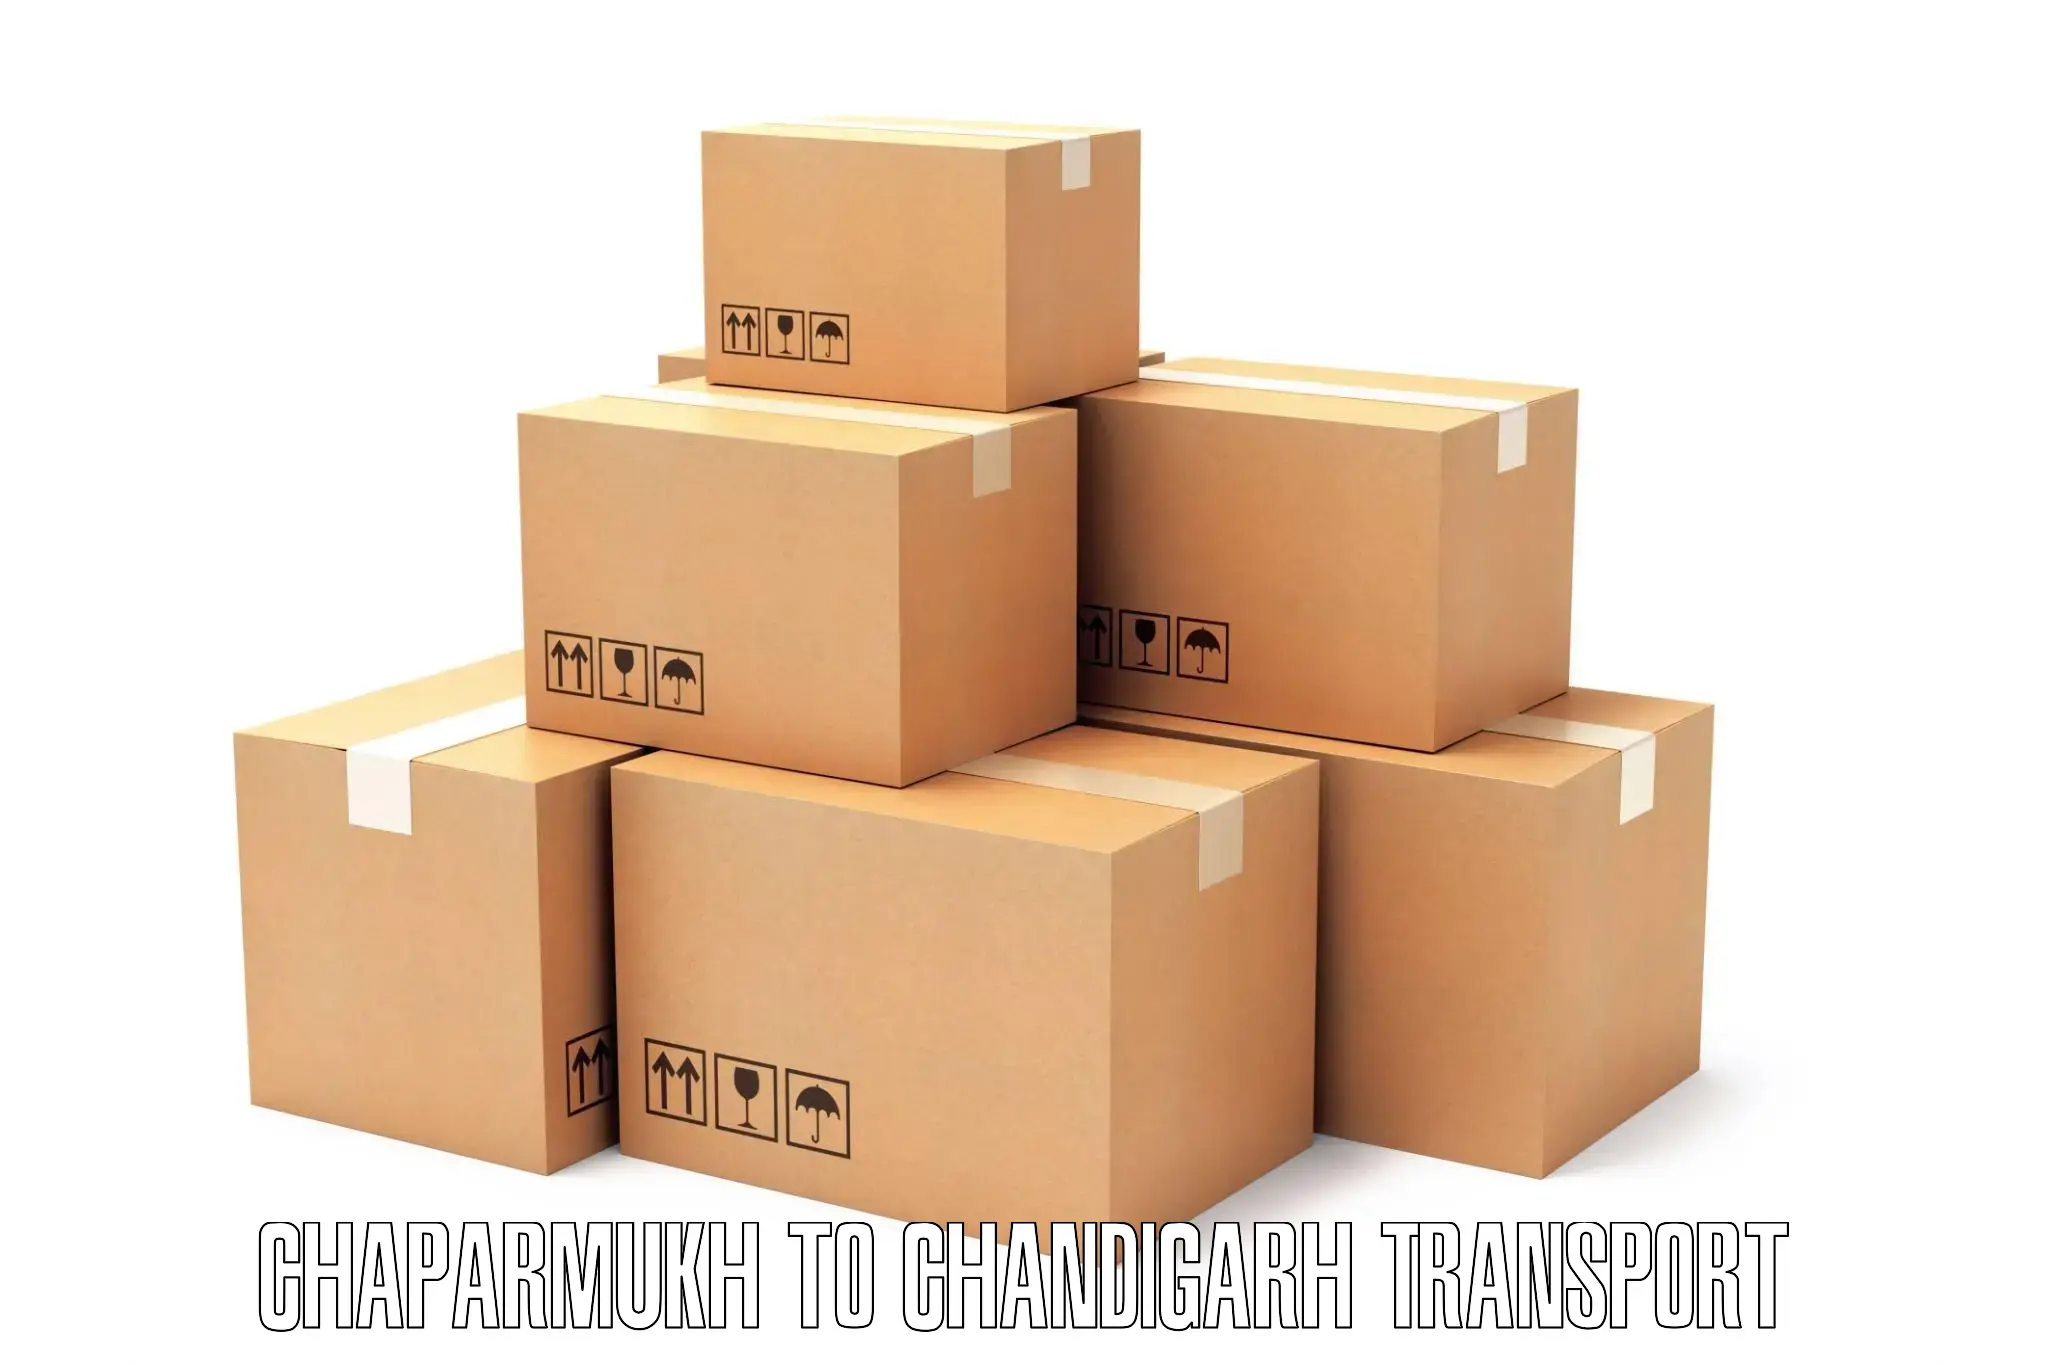 Goods delivery service Chaparmukh to Chandigarh